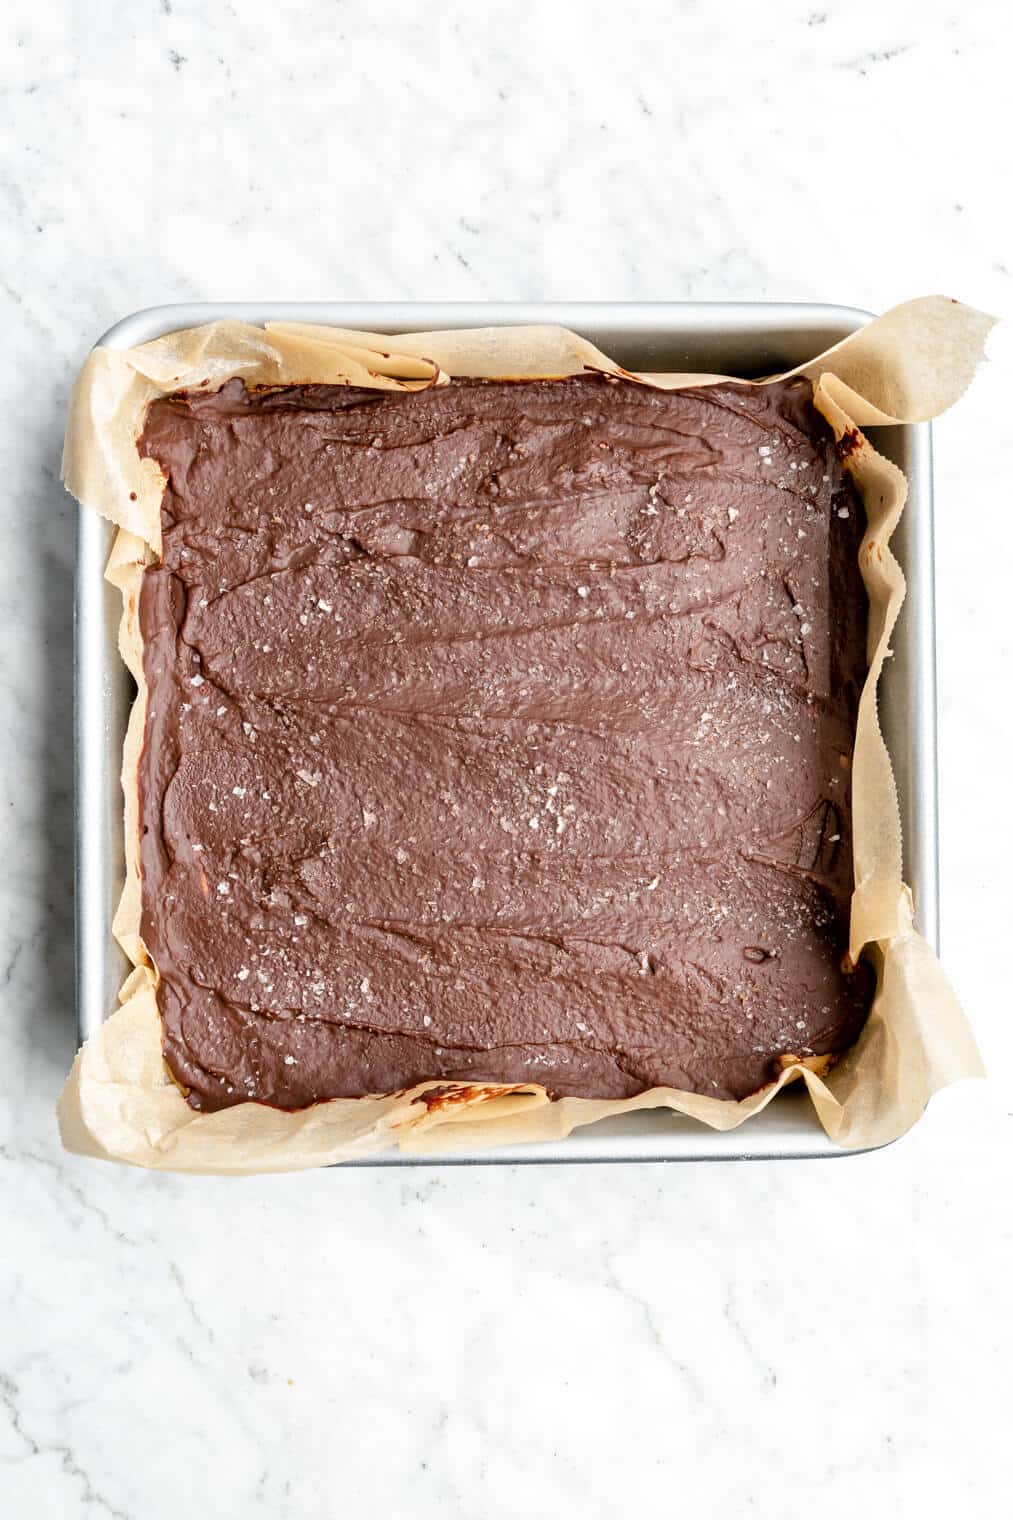 Millionaire bars with set chocolate ganache in an 8x8 pan lined with parchment paper.